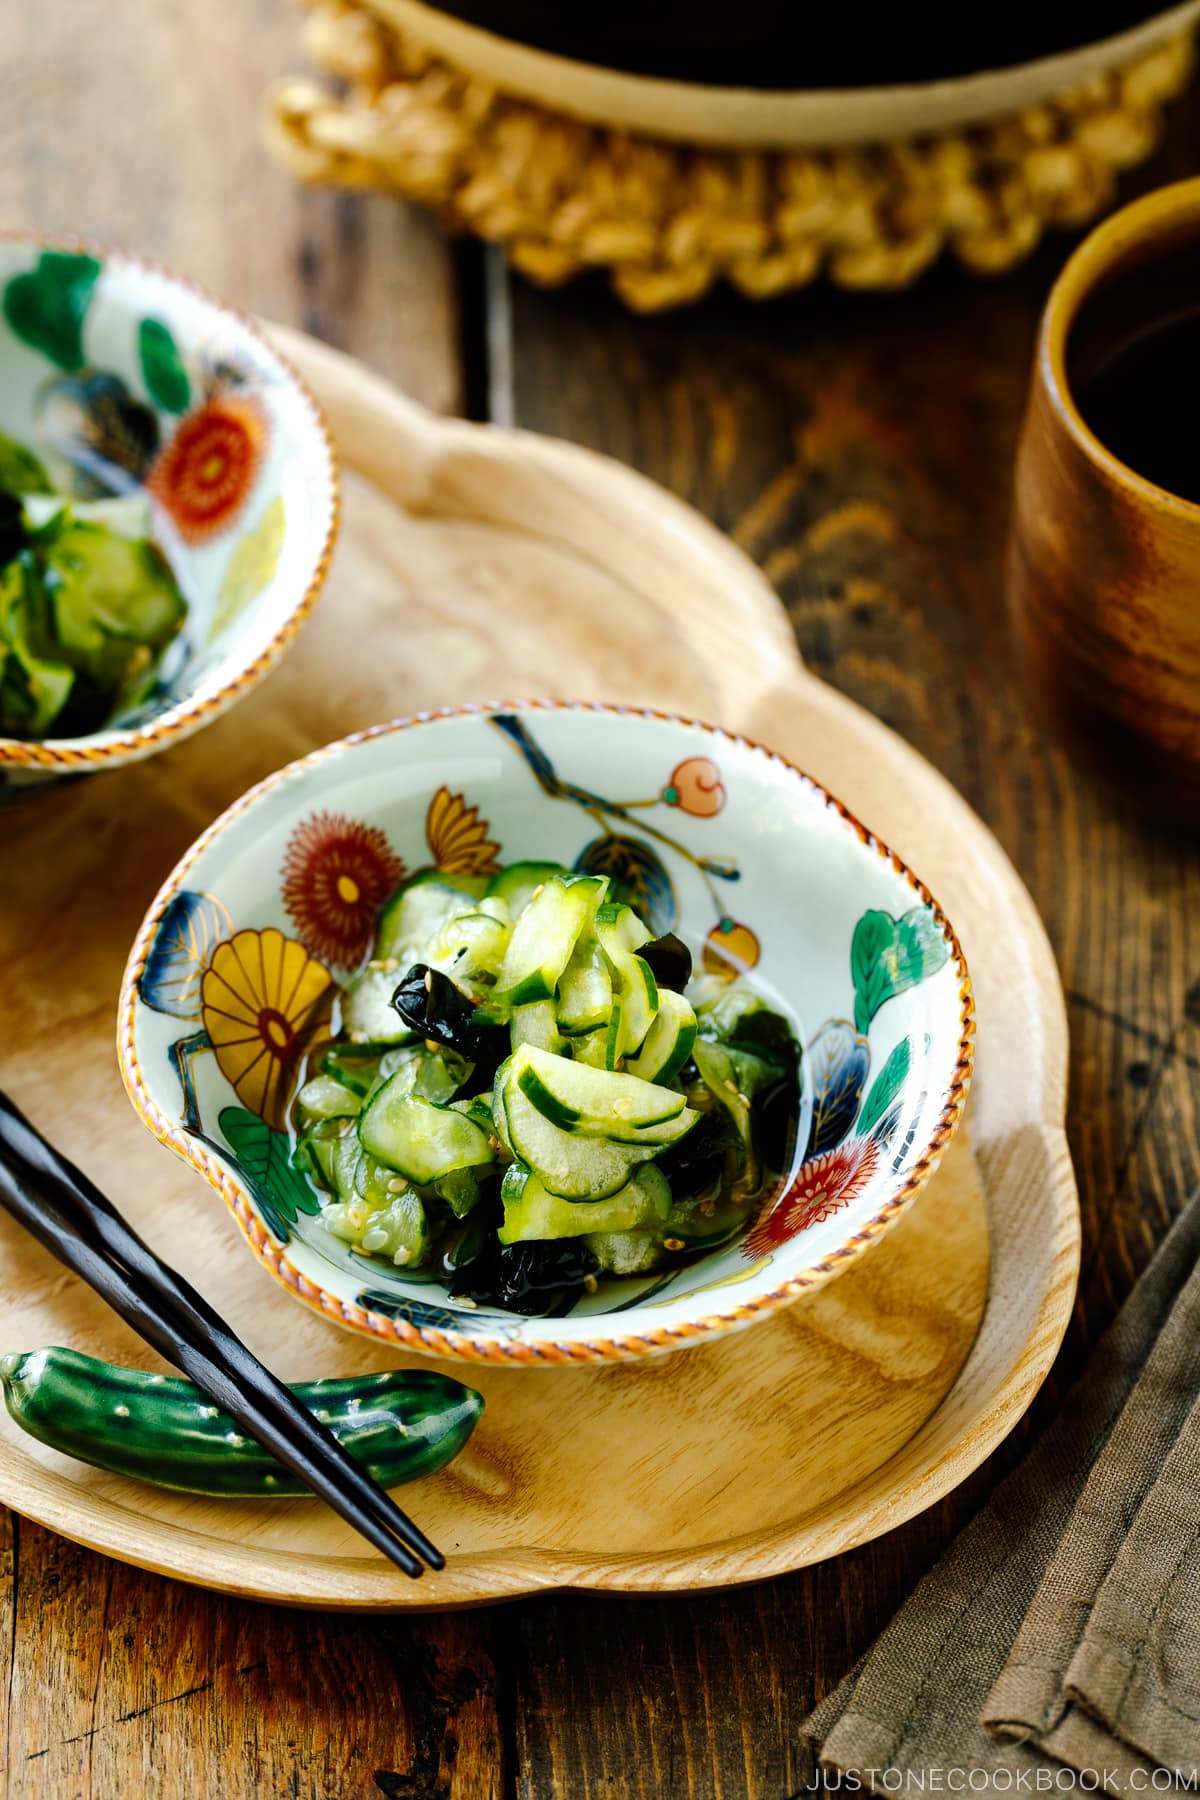 Small Japanese bowls containing Japanese cucumber salad called Sunomono served on top of a wooden tray along with a cucumber shaped chopstick rest and chopsticks.